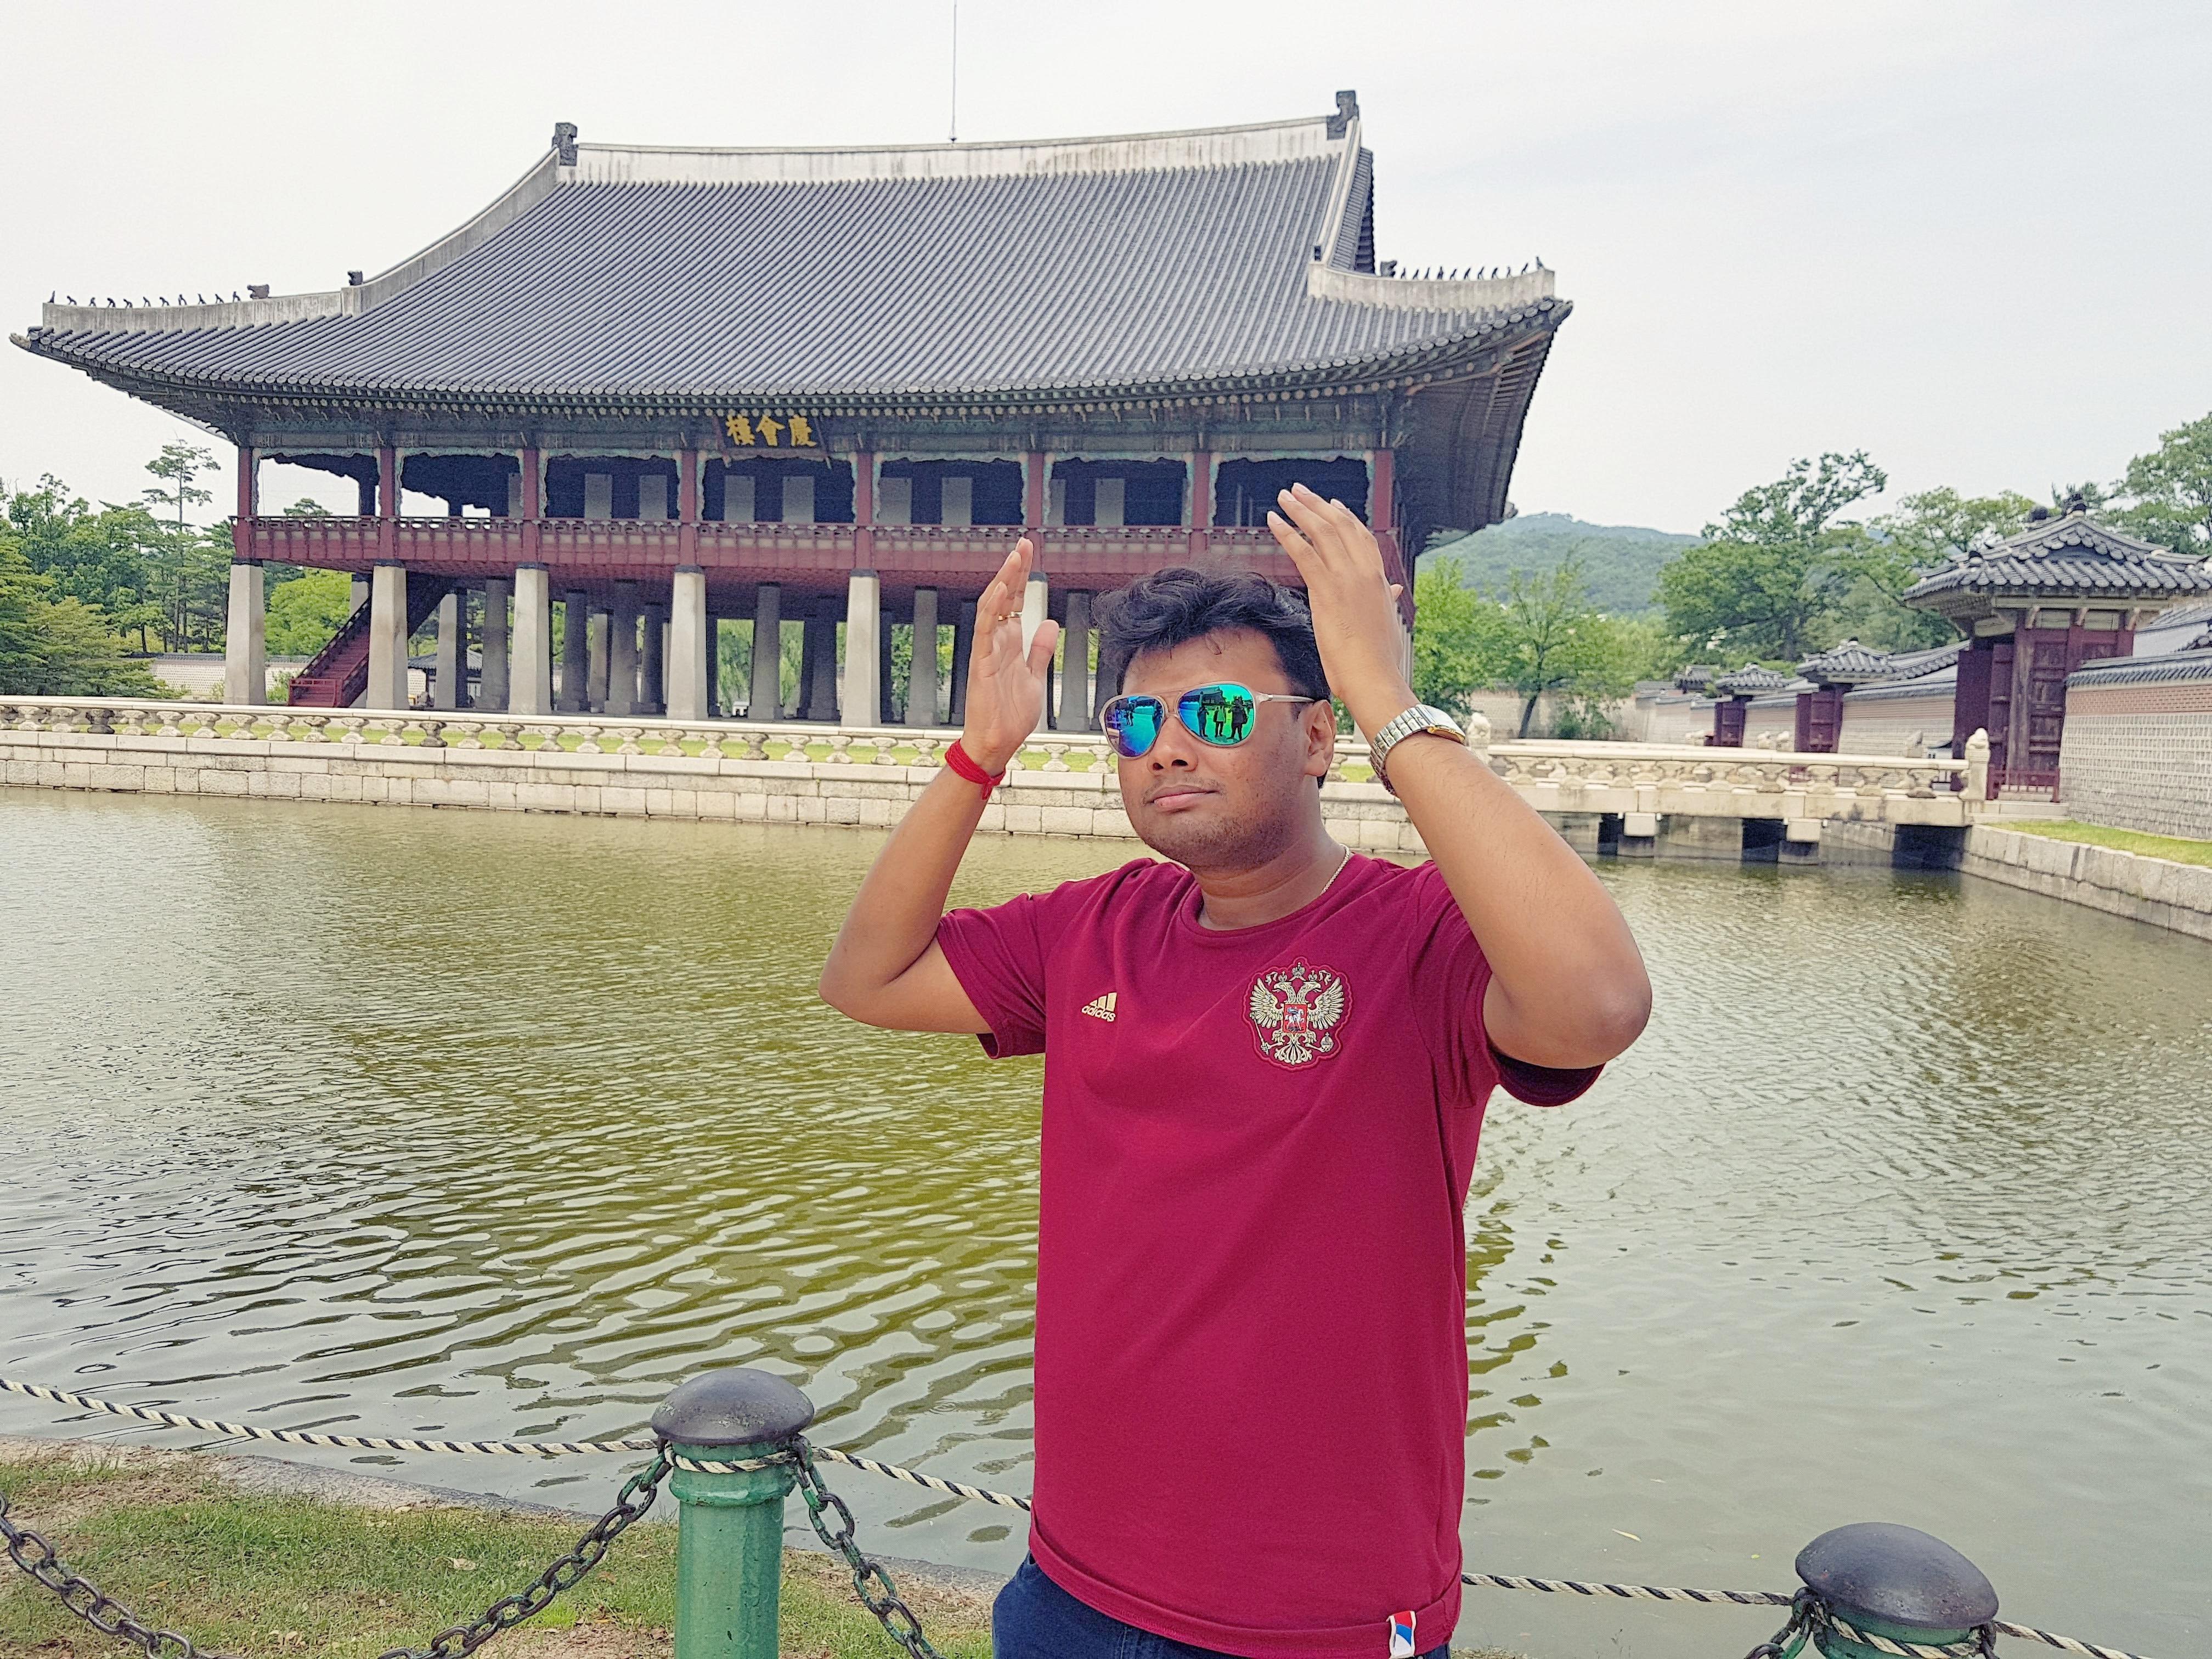 Sourav Ghosh, standing in palace premises in Seoul, South Korea